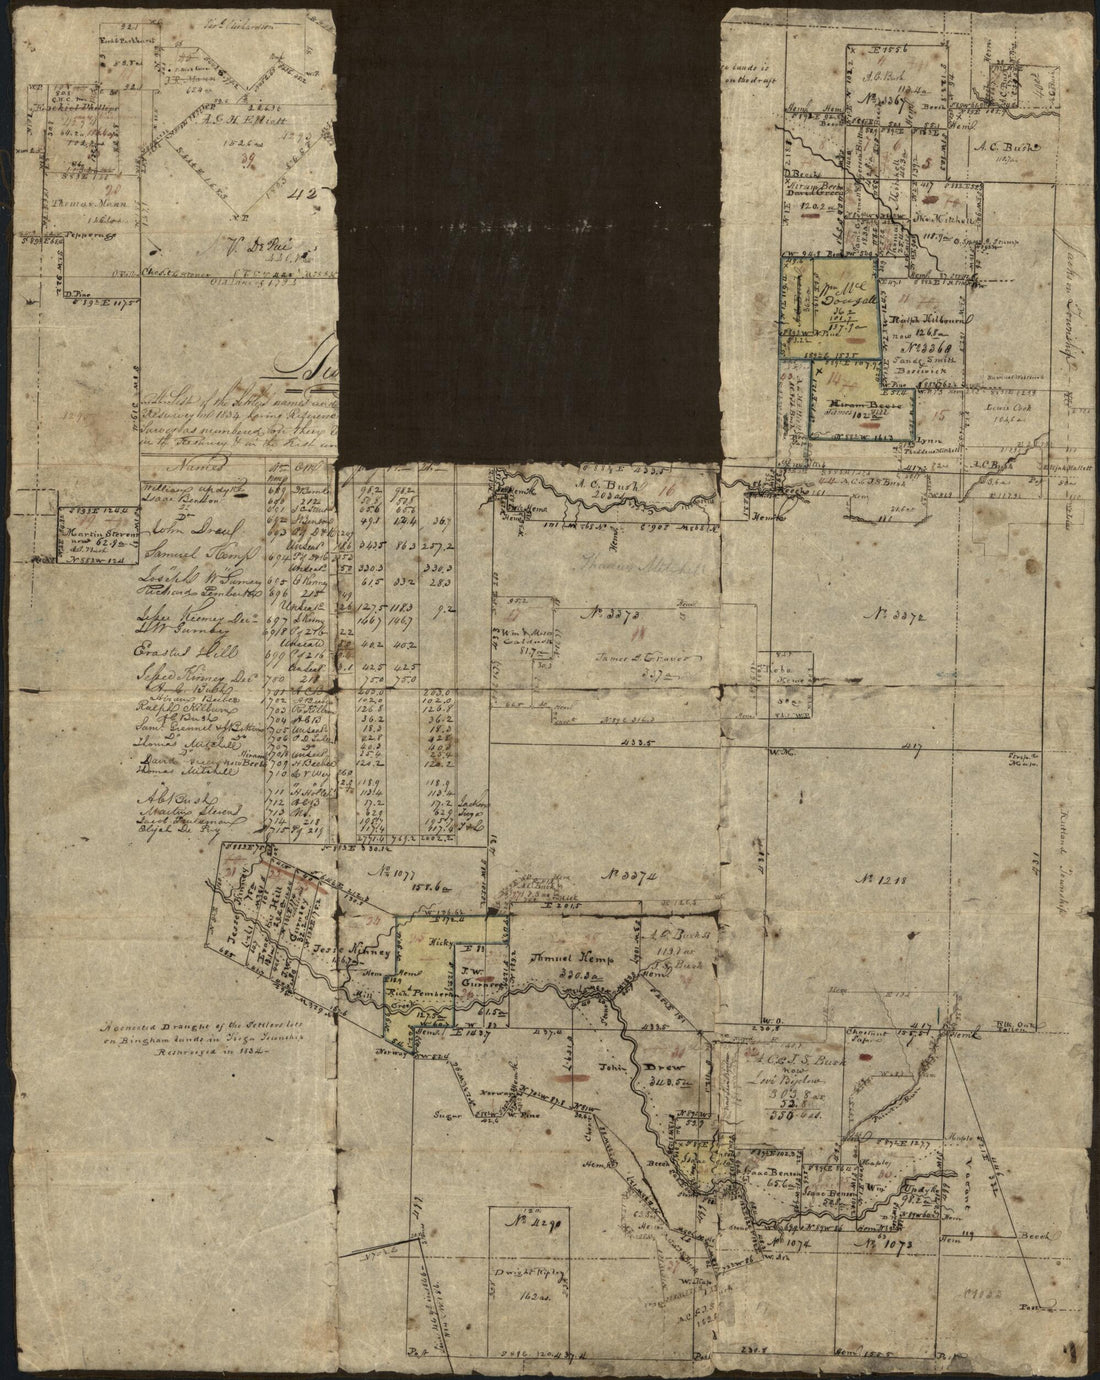 This old map of Tioga, New Nos from 1834 was created by William Bingham in 1834